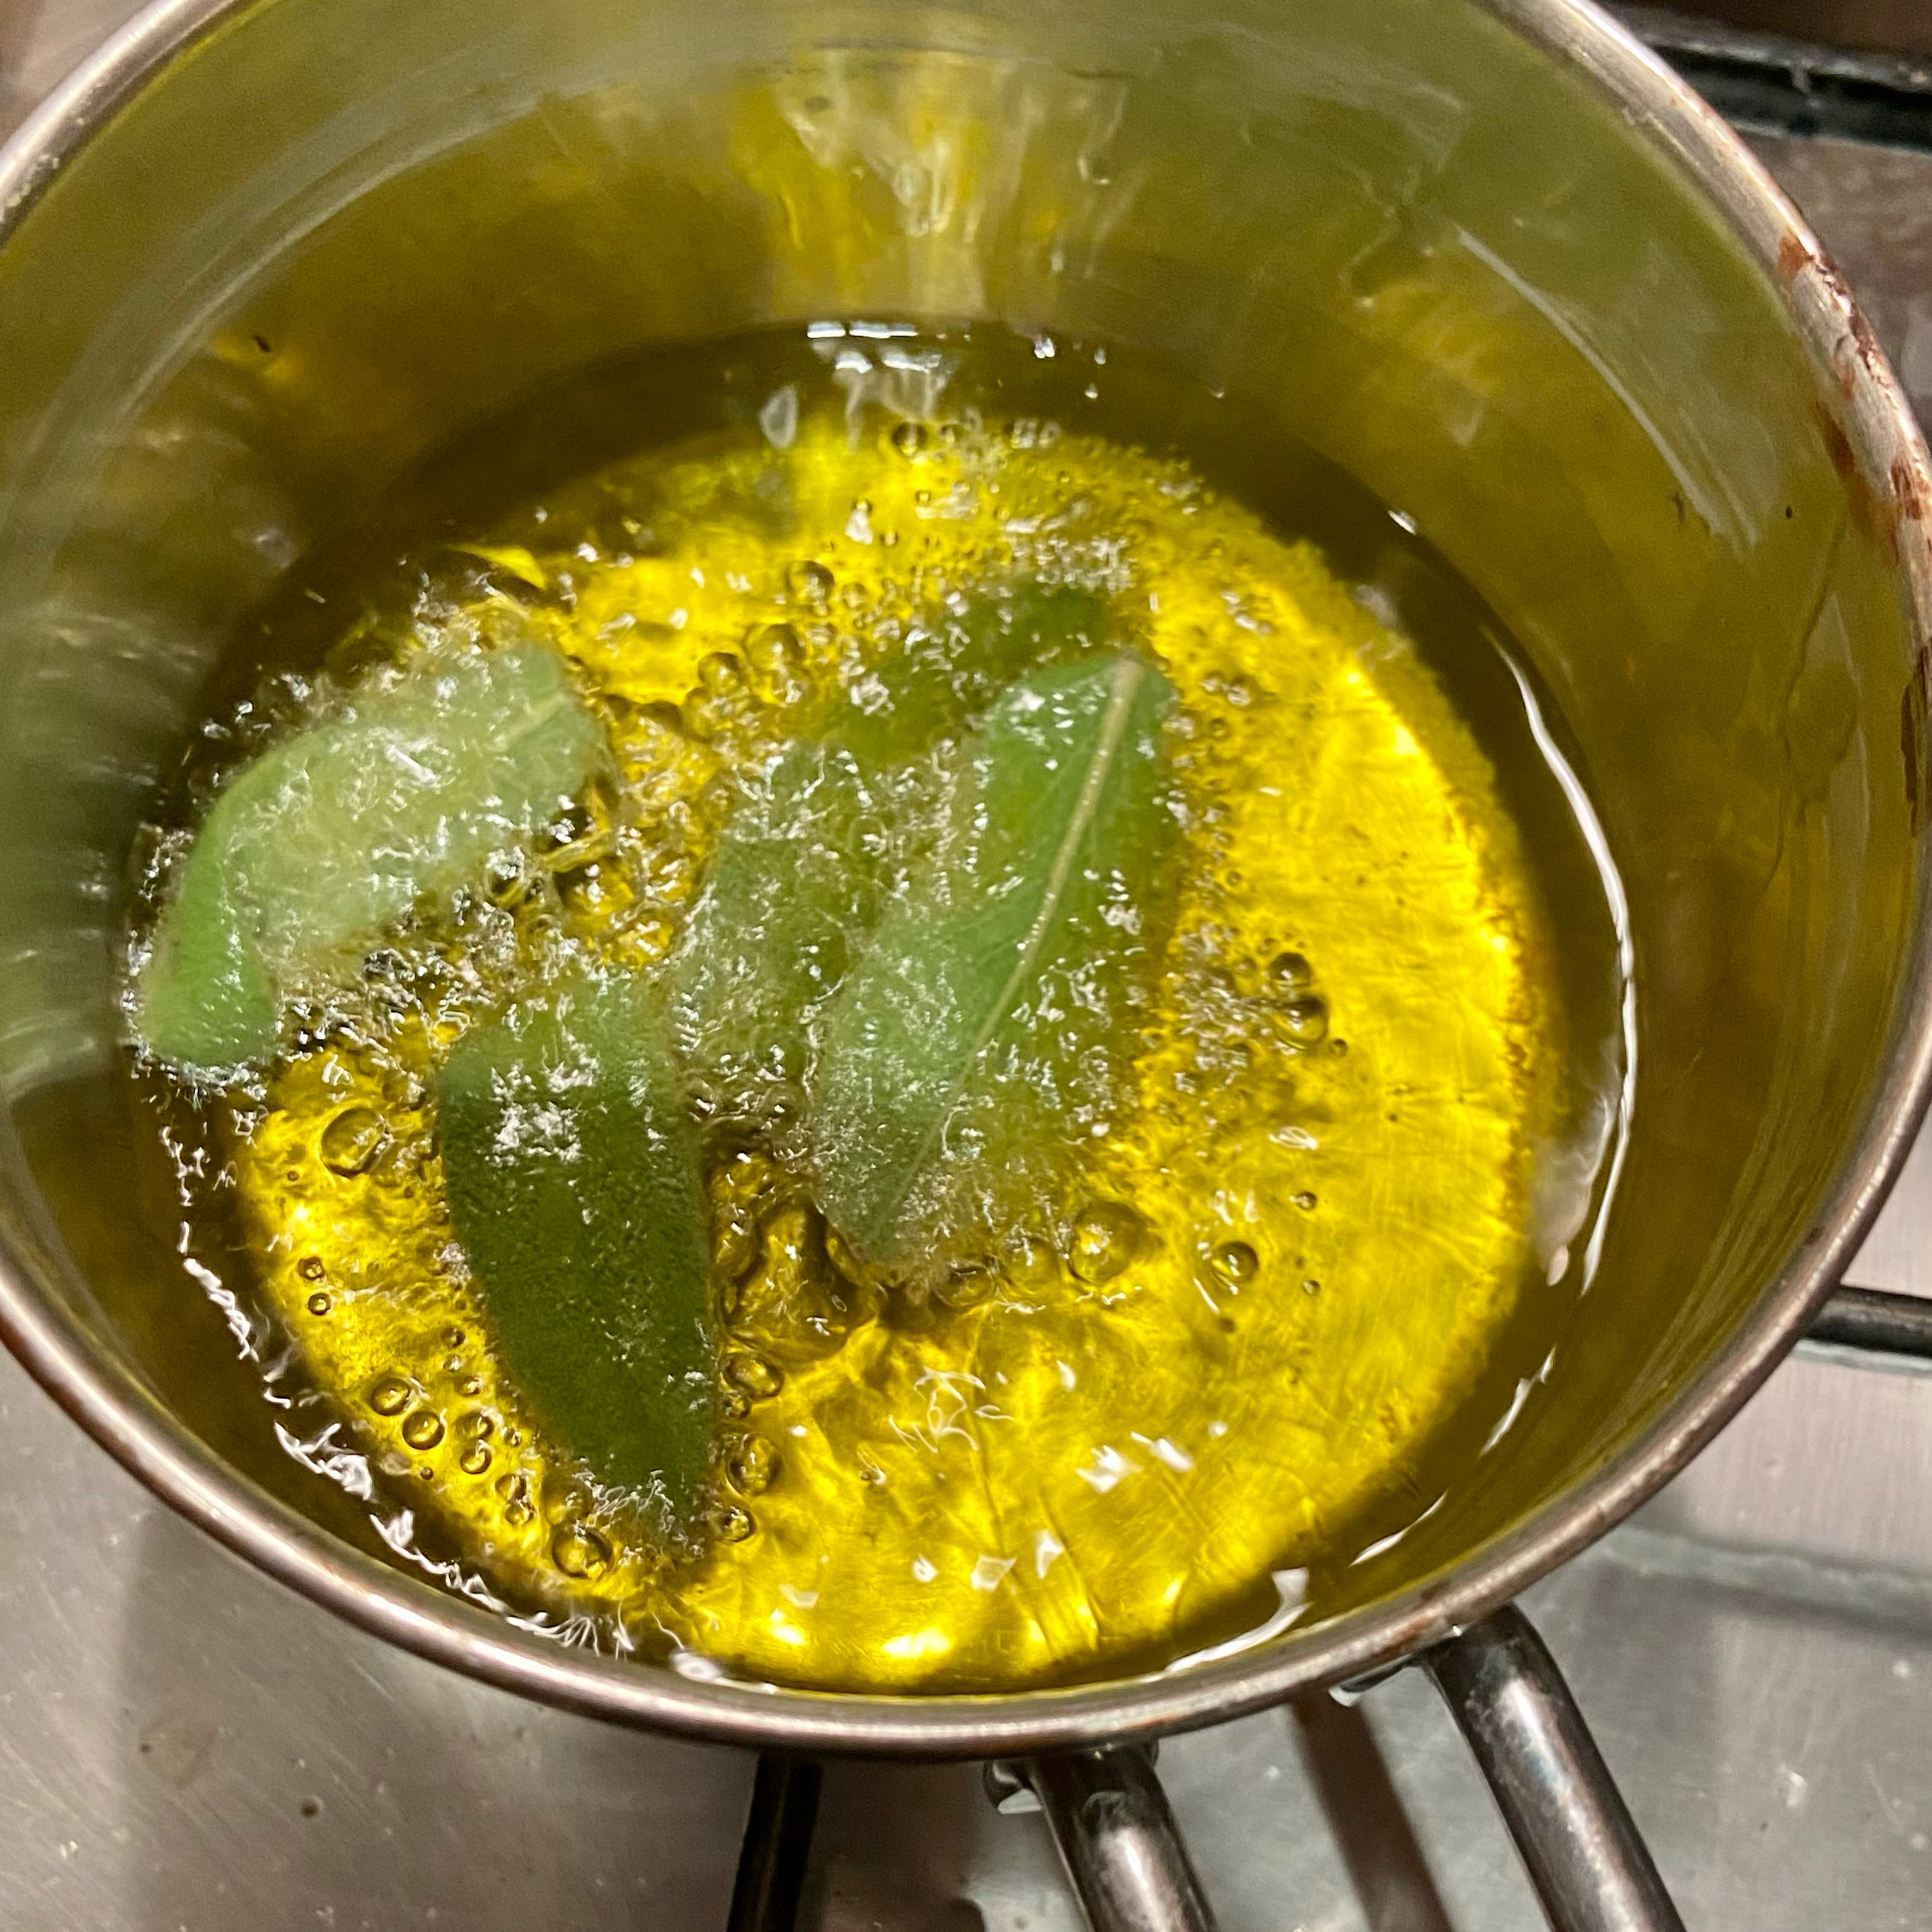 Optional - heat some oil on a saucer and quickly deep fry remaining sage leaves. It’s only takes seconds once oil is up to temperature.